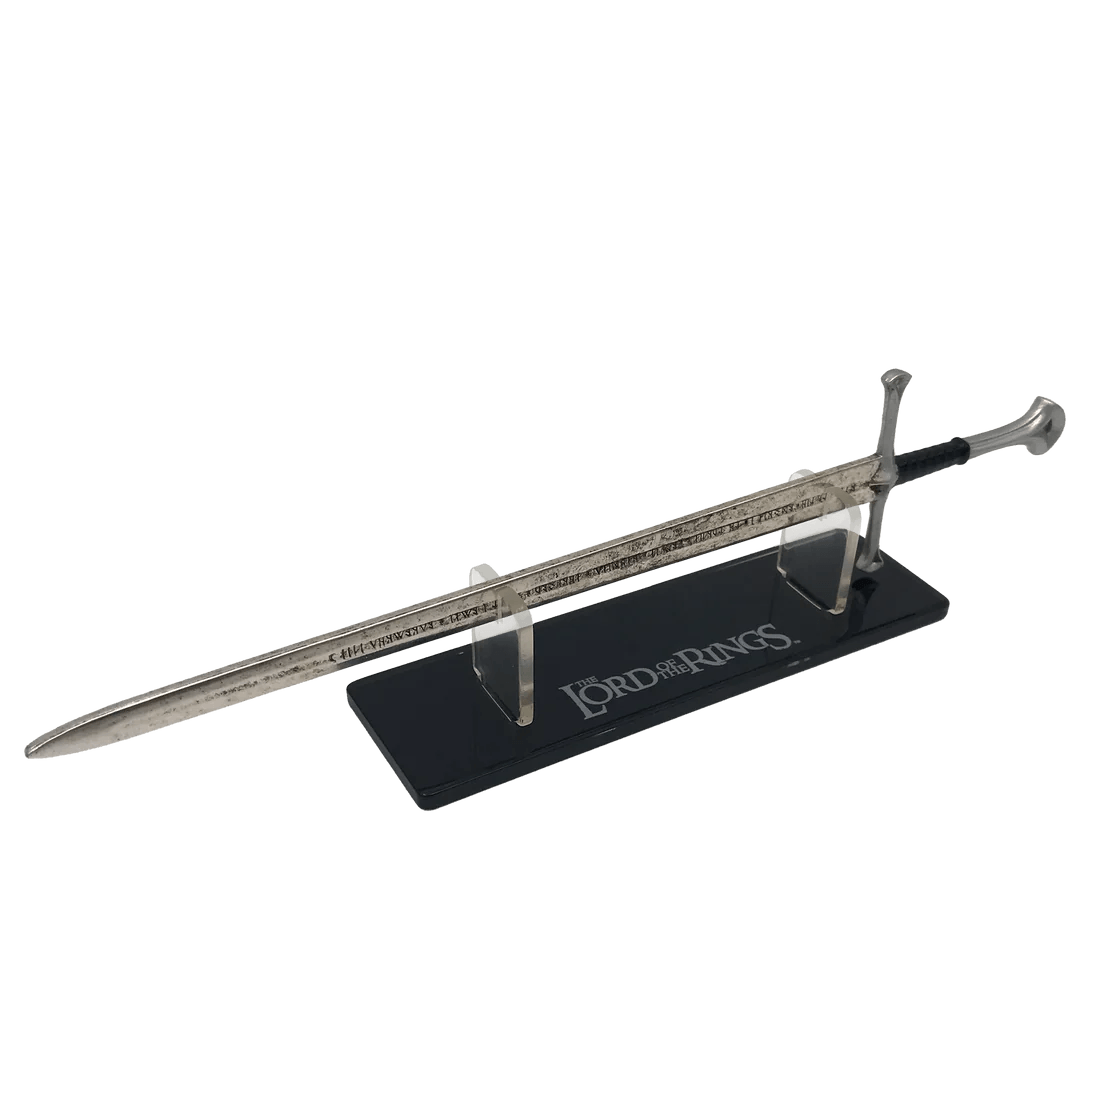 FAC408706 The Lord of the Rings - Anduril sword Scaled Prop Replica - Factory Entertainment - Titan Pop Culture